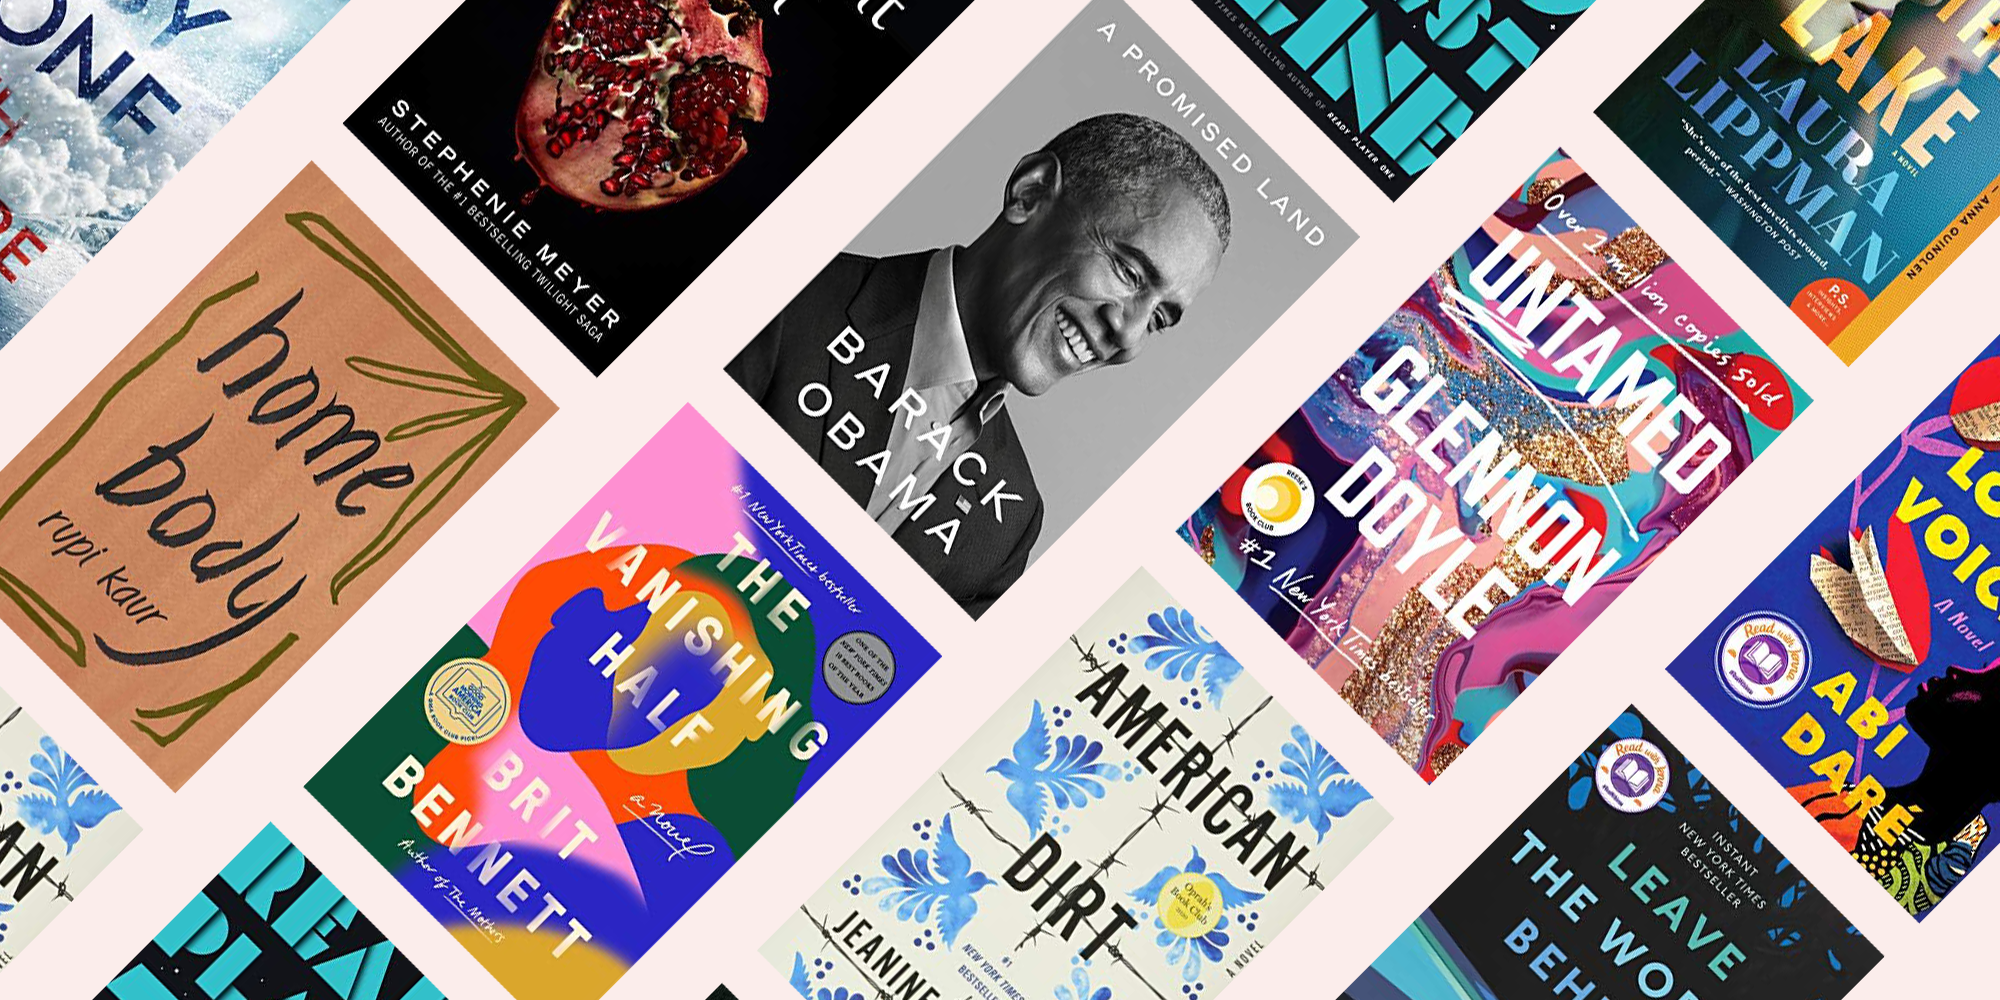 Books of 2020 - Best Reads of 2020